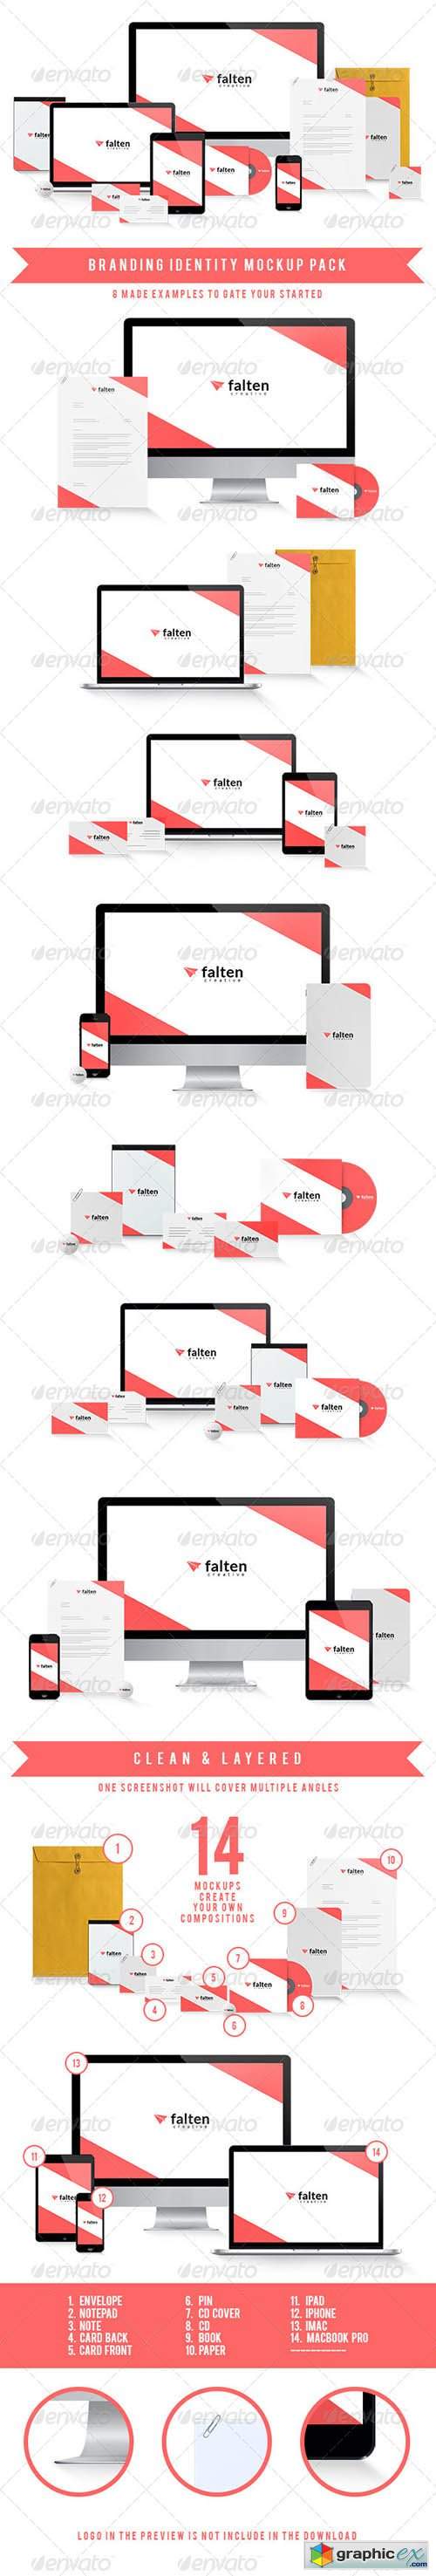 Download Free Free Download Vector Stock Image Photoshop Icon Page 1016 PSD Mockups.